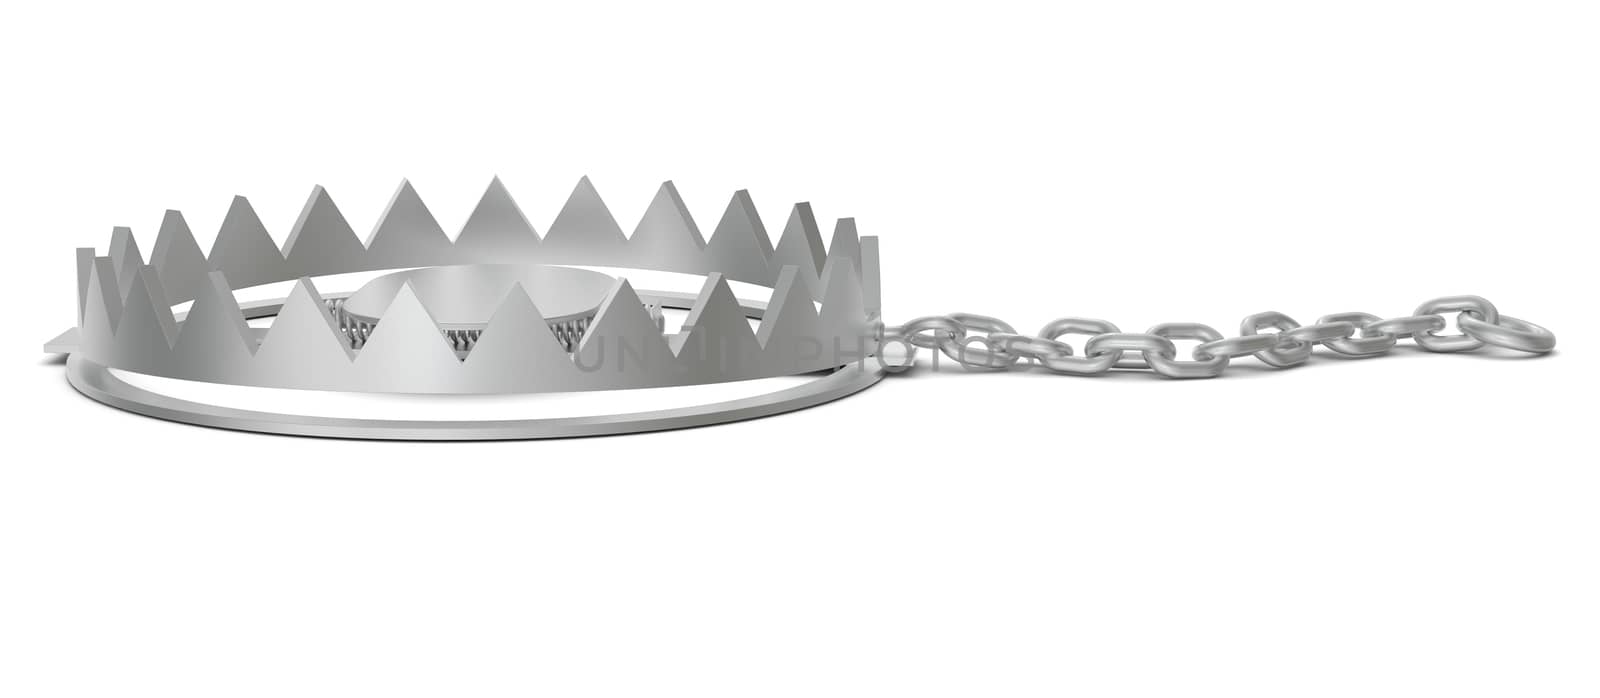 Bear trap with chain, side view by cherezoff